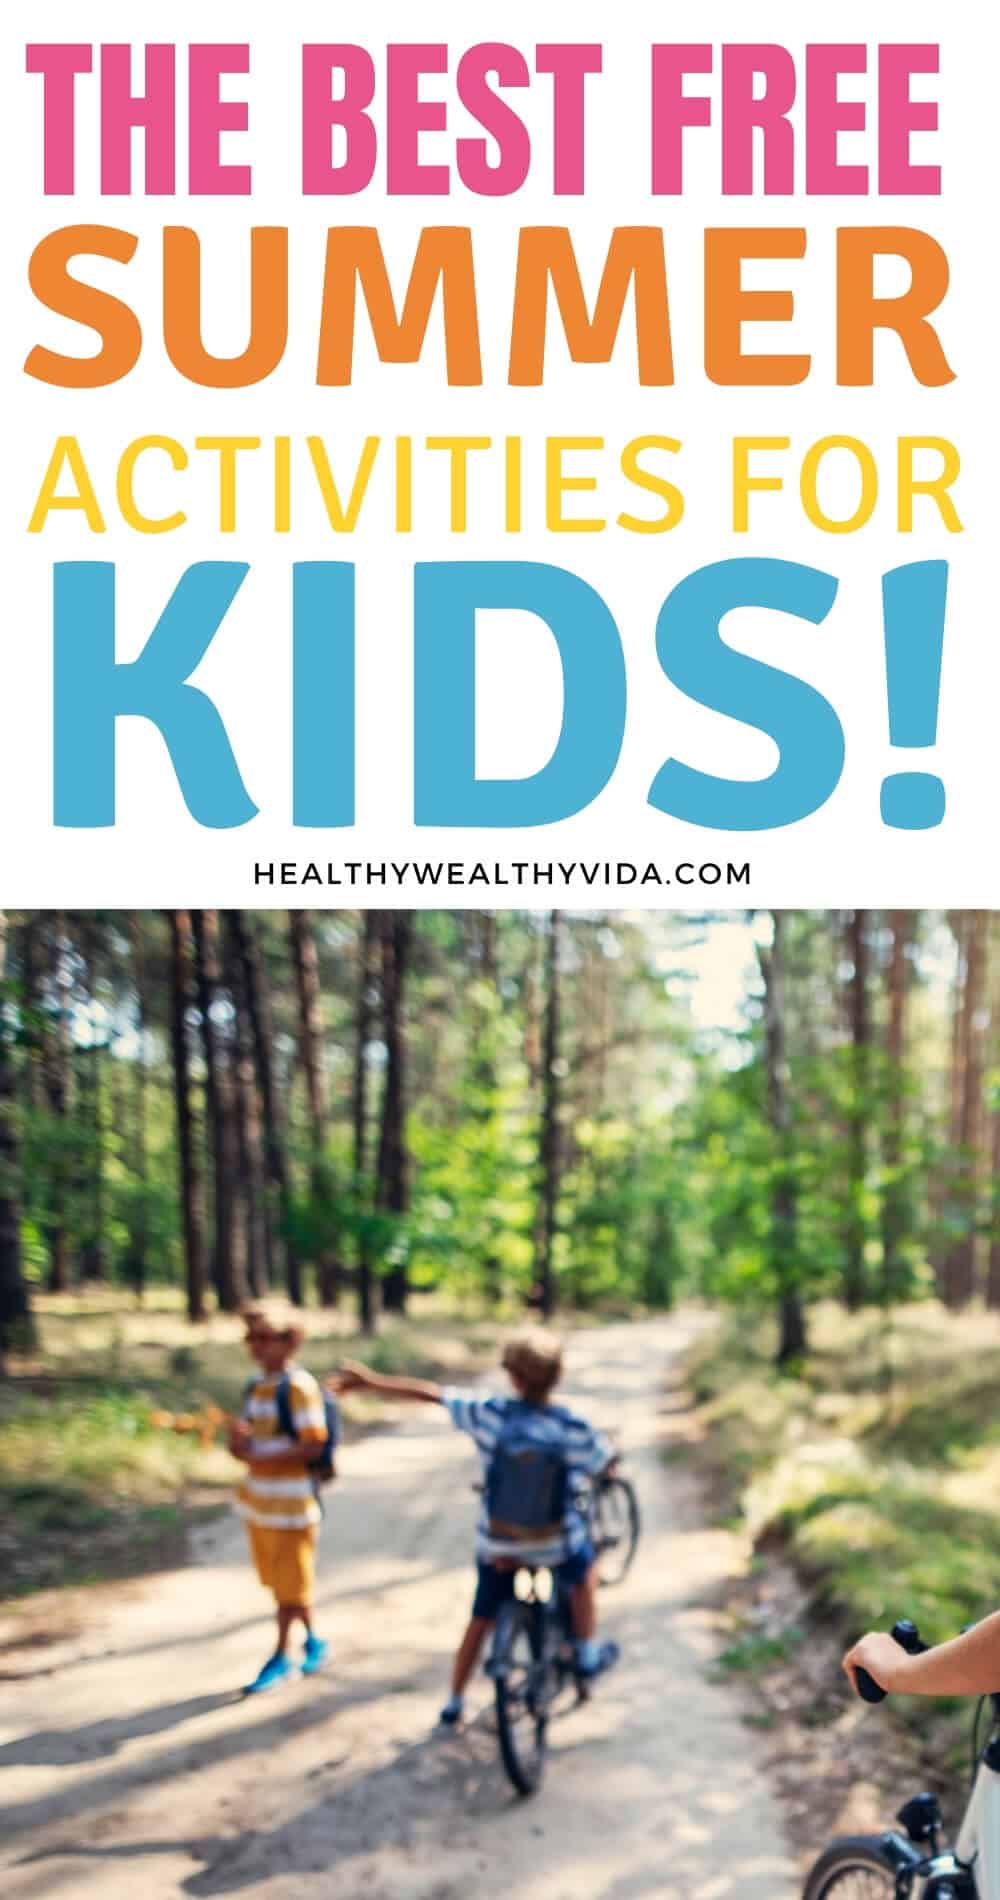 The Best Free Summer Activities For Kids